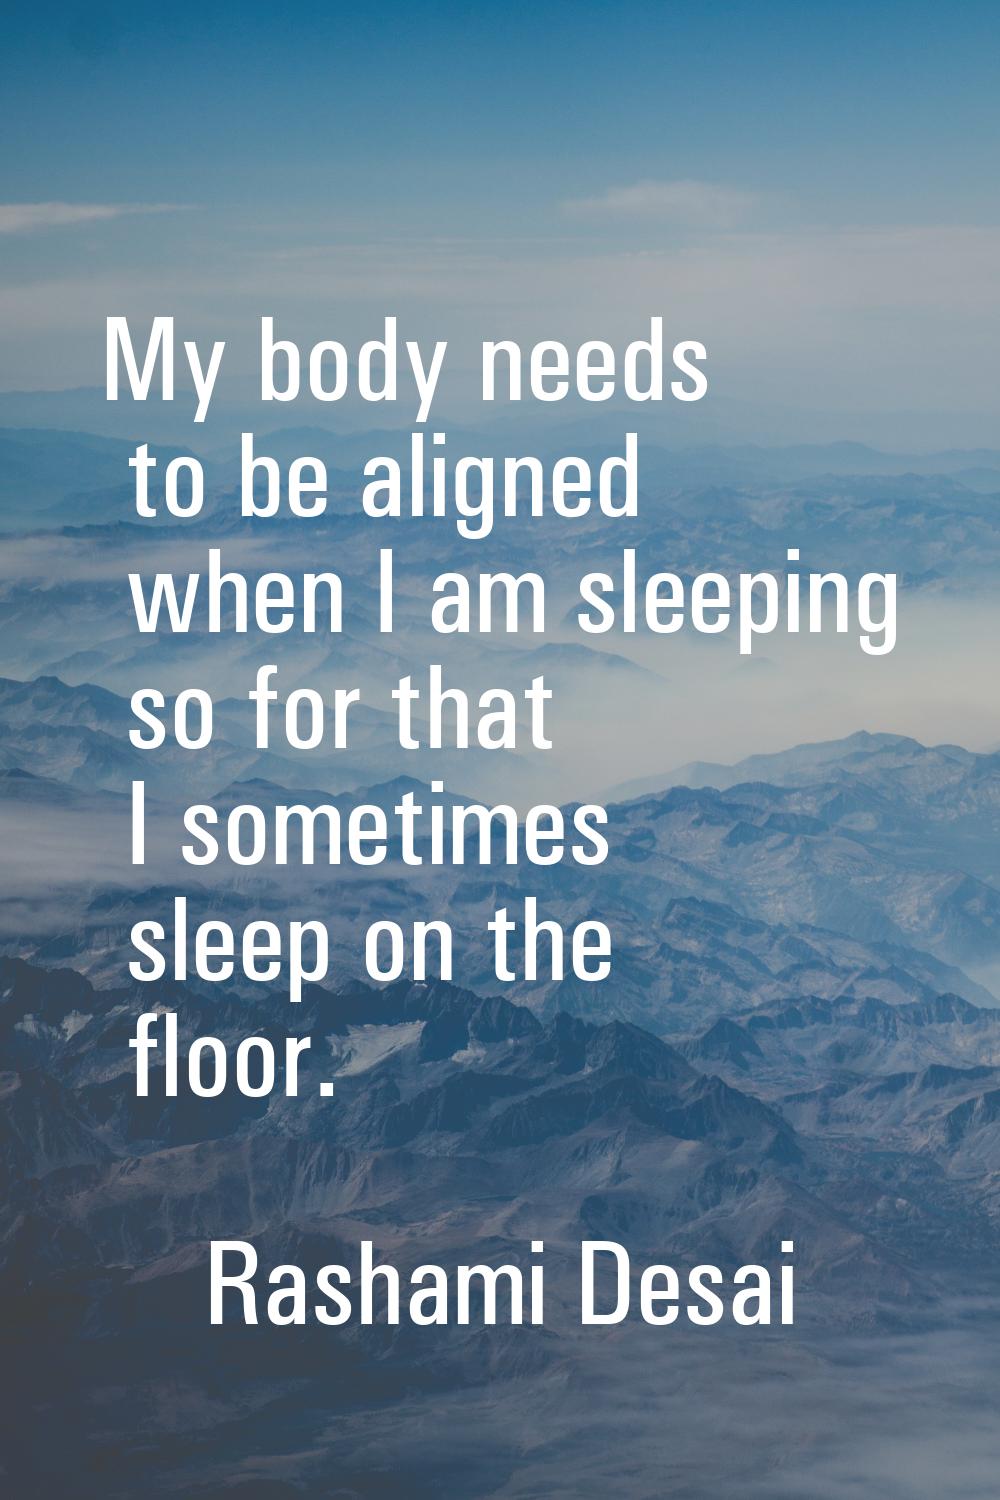 My body needs to be aligned when I am sleeping so for that I sometimes sleep on the floor.